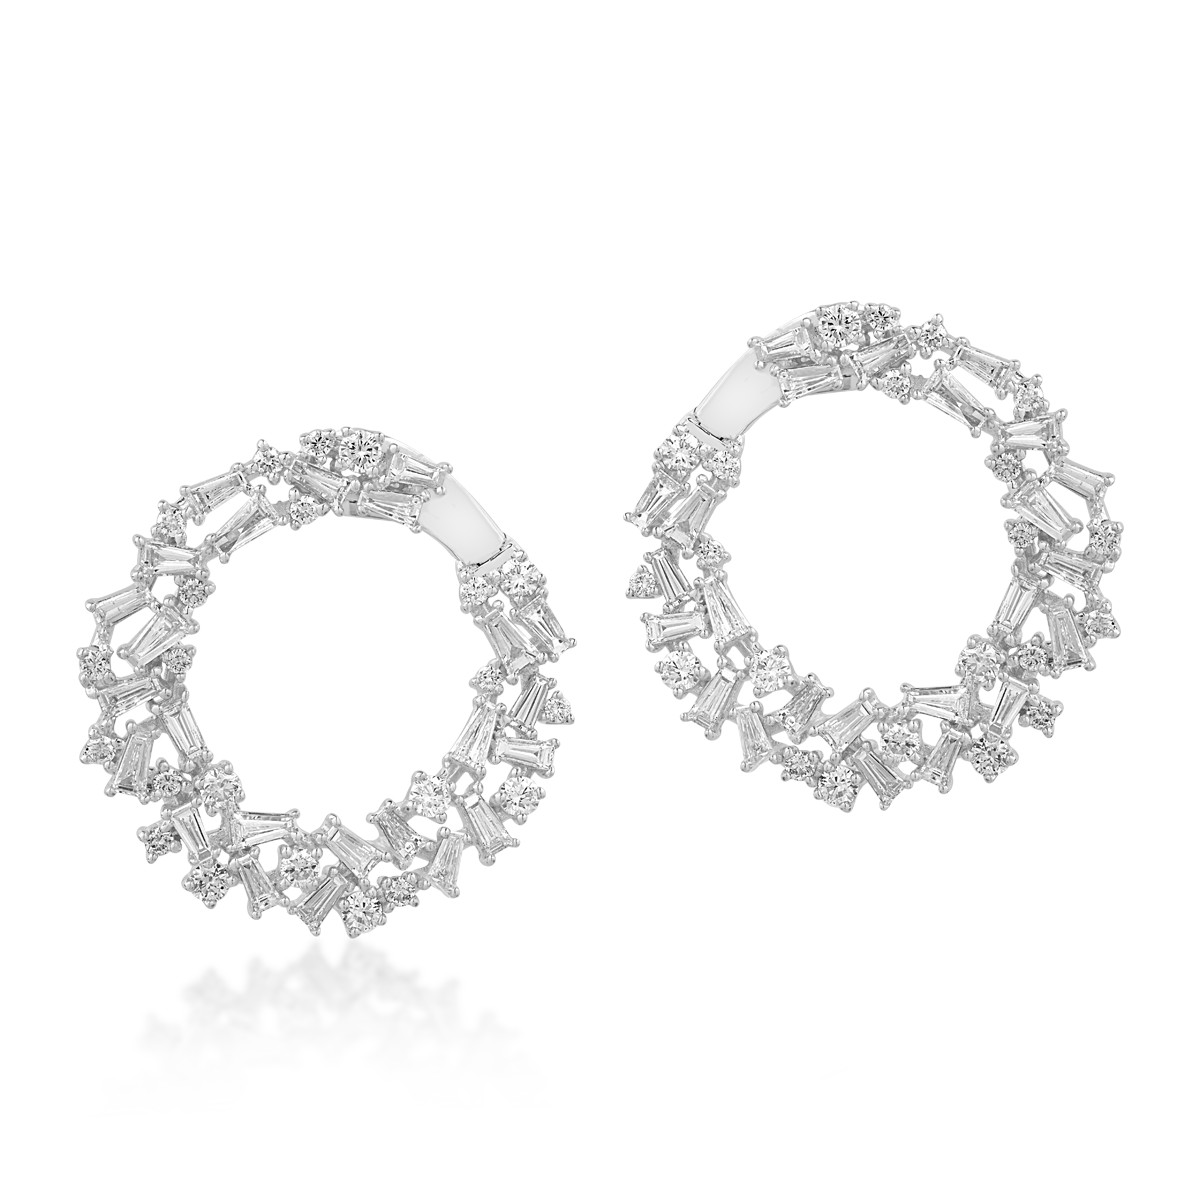 18K white gold earrings with 3.05ct diamonds